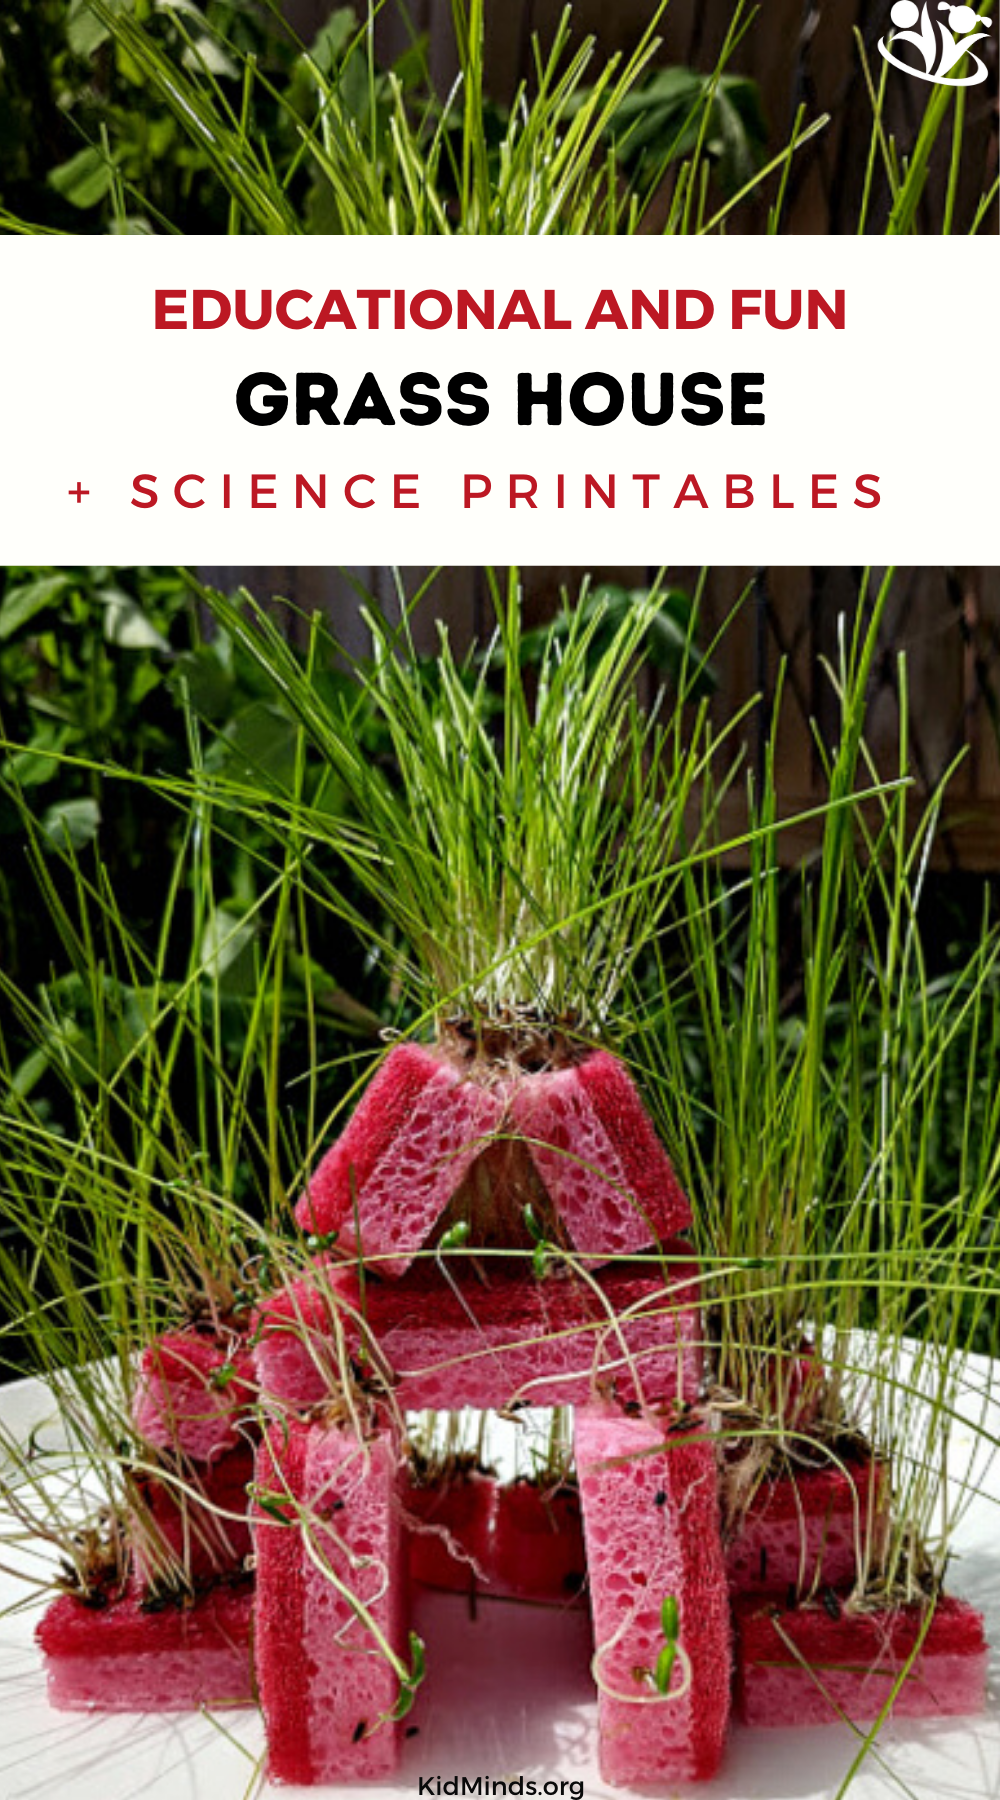 Got kitchen sponges and seeds? Then you have to try growing a grass house with your kids. #kidsactivities #STEM #scienceforlittlekids #handsonlearning #laughingkidslearn #kidminds #grassscience